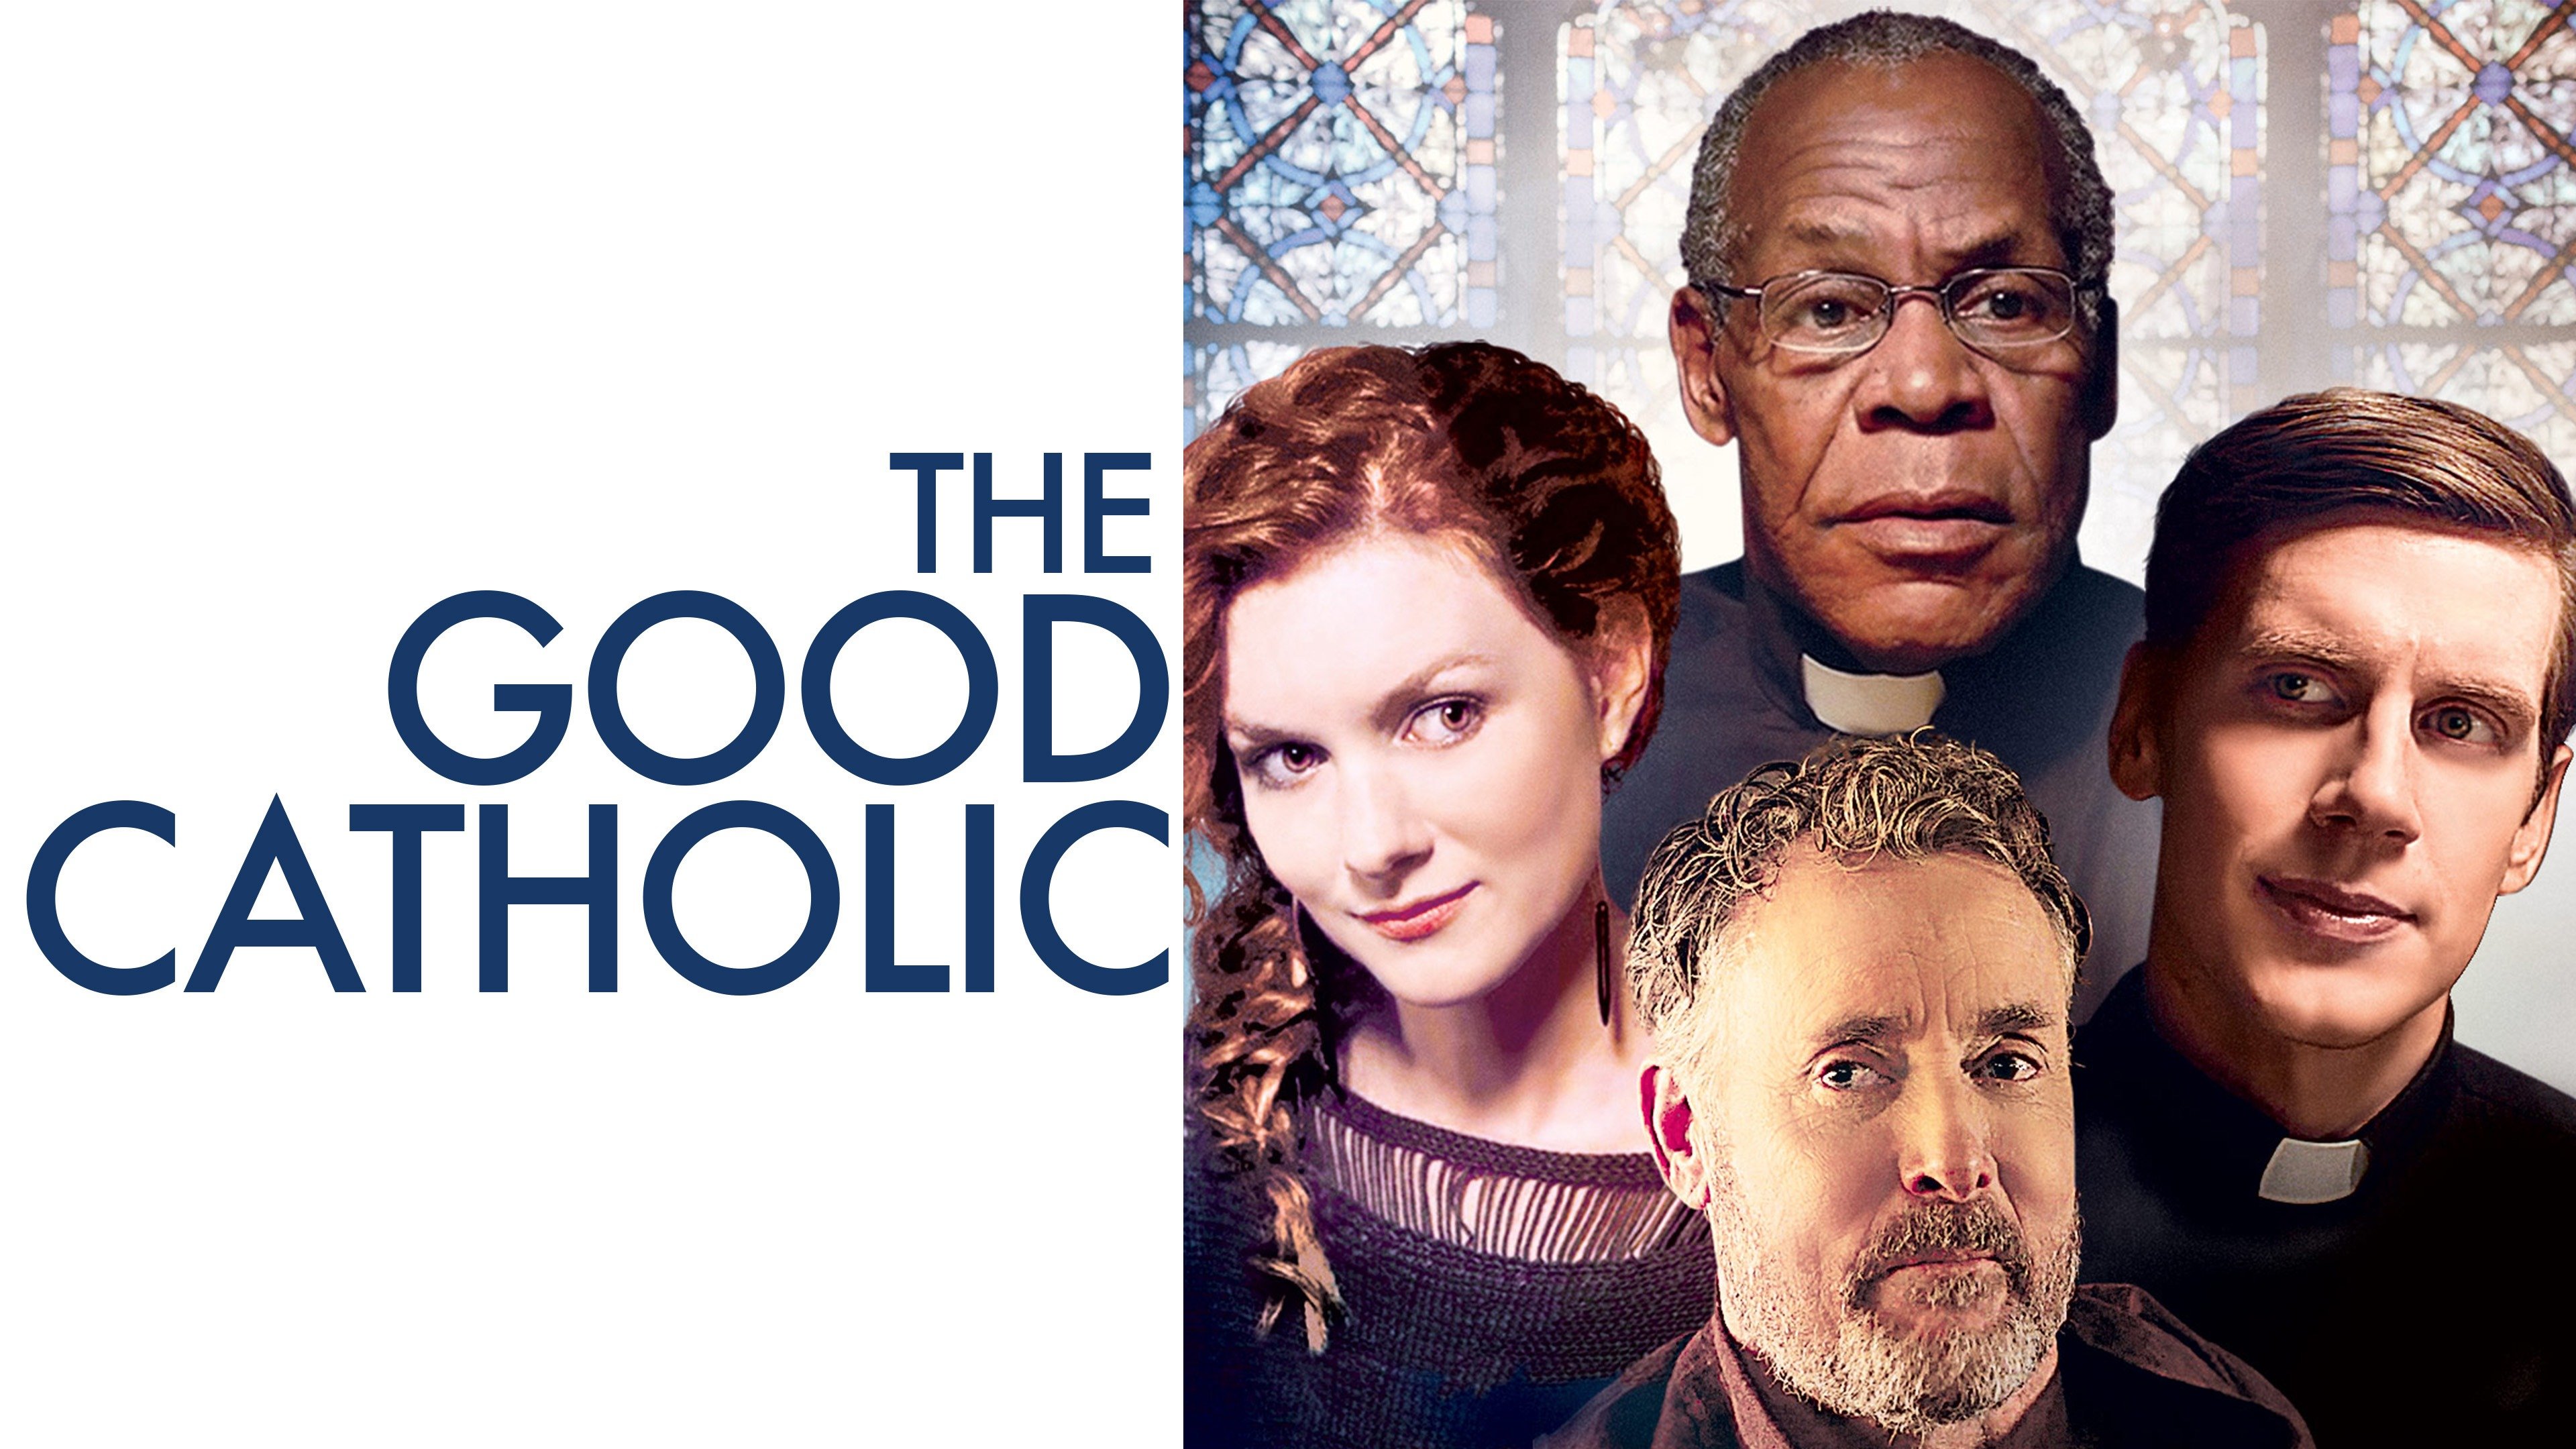 The Good Catholic Trailer 1 Trailers & Videos Rotten Tomatoes